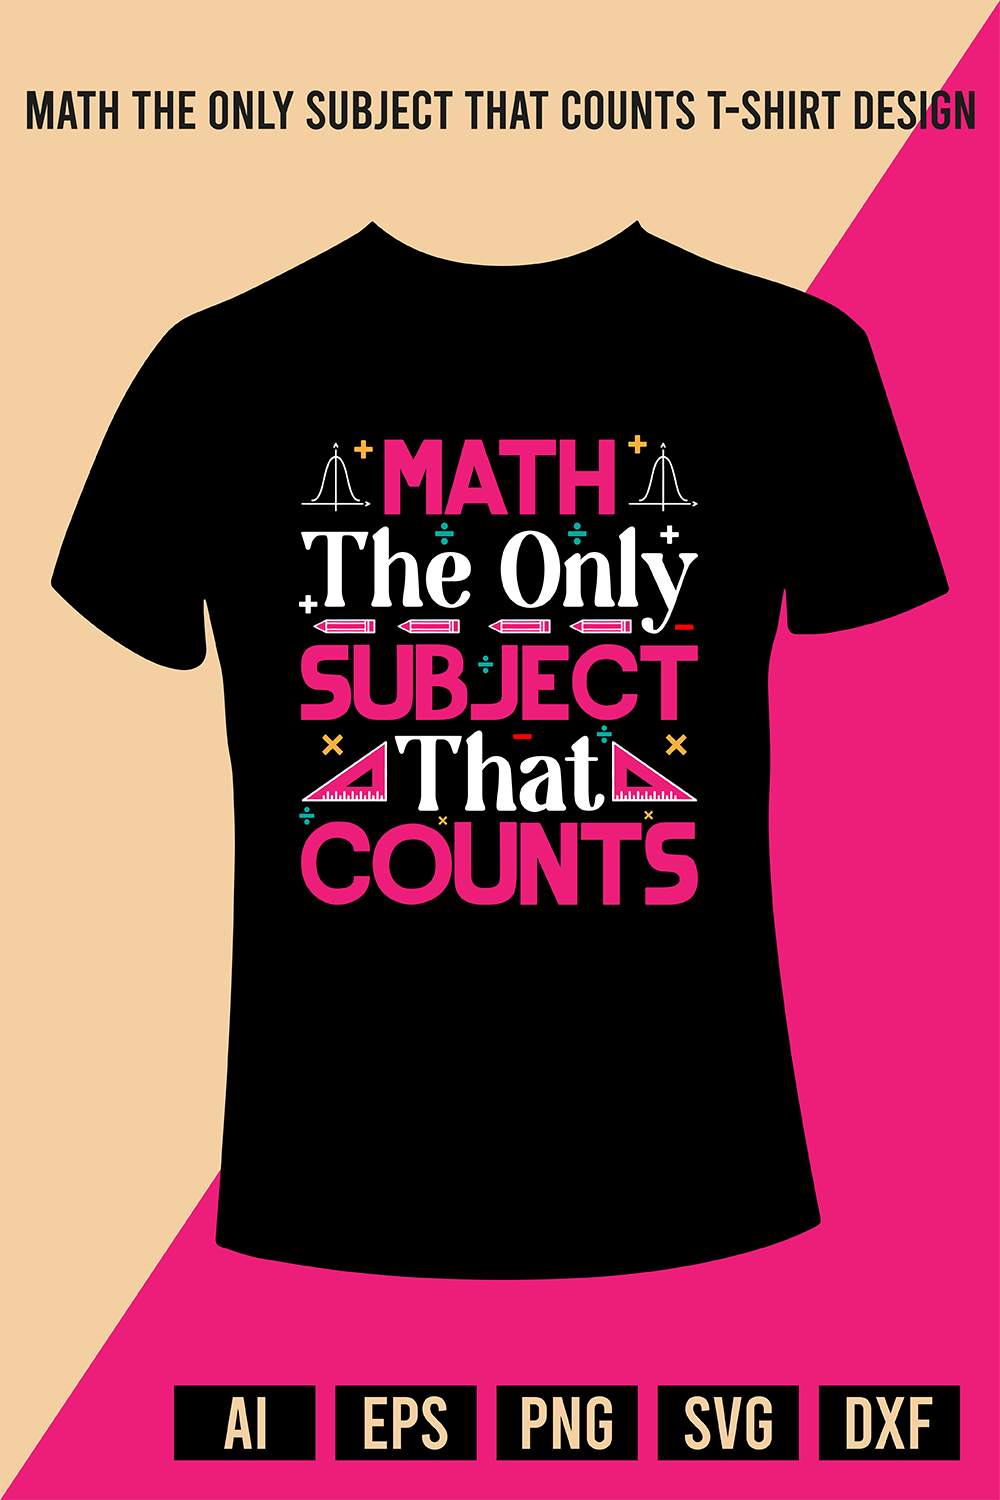 Math The Only Subject That Counts T-Shirt Design pinterest image.